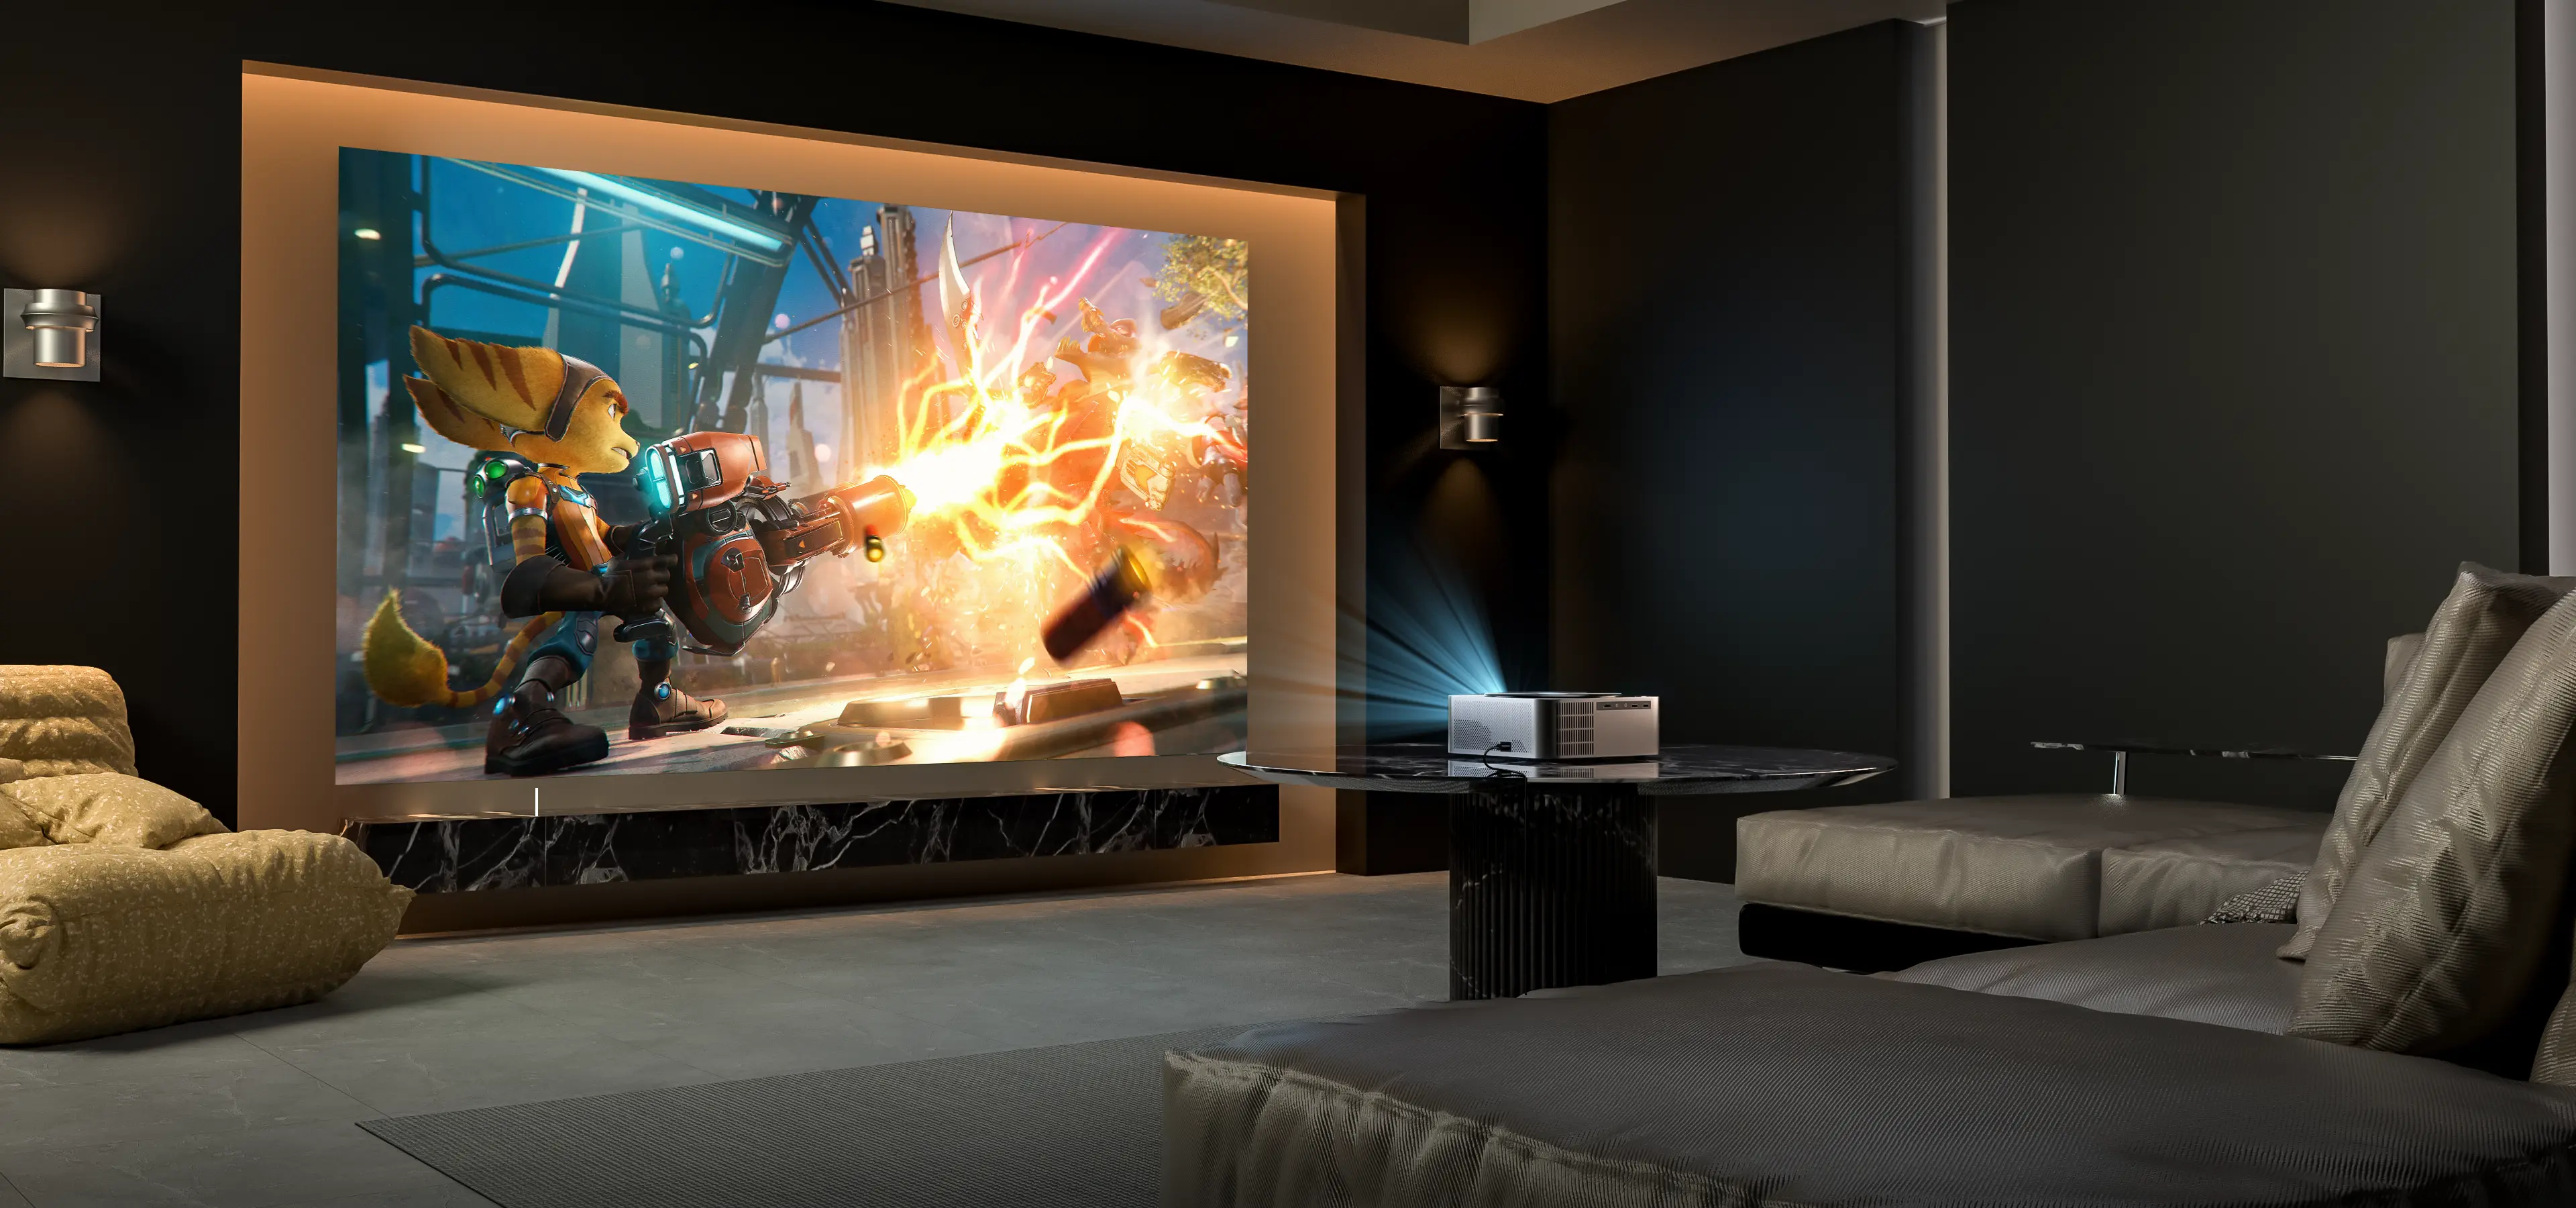 Watch big but not spend big!, Watch big but not spend big! See how @hsrrom  transforms her bedroom entertainment with the Apollo P40 projector.🛌✨, By  Ultimea